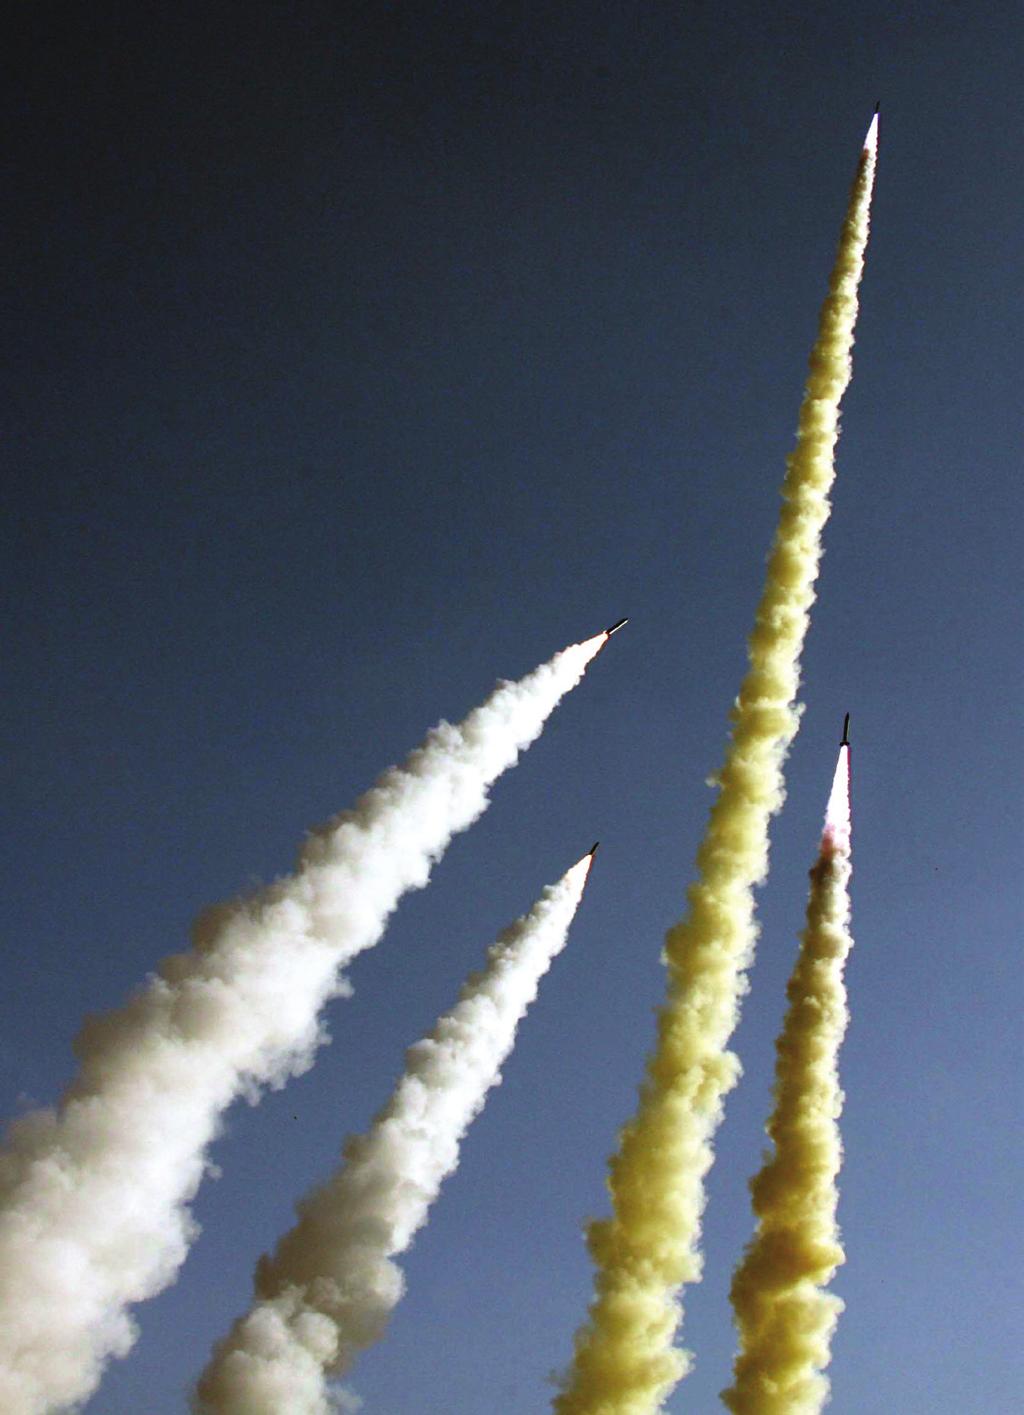 The 350-km.-range Ra ad ( Thunder ) anti-ship missile is of great strategic significance.